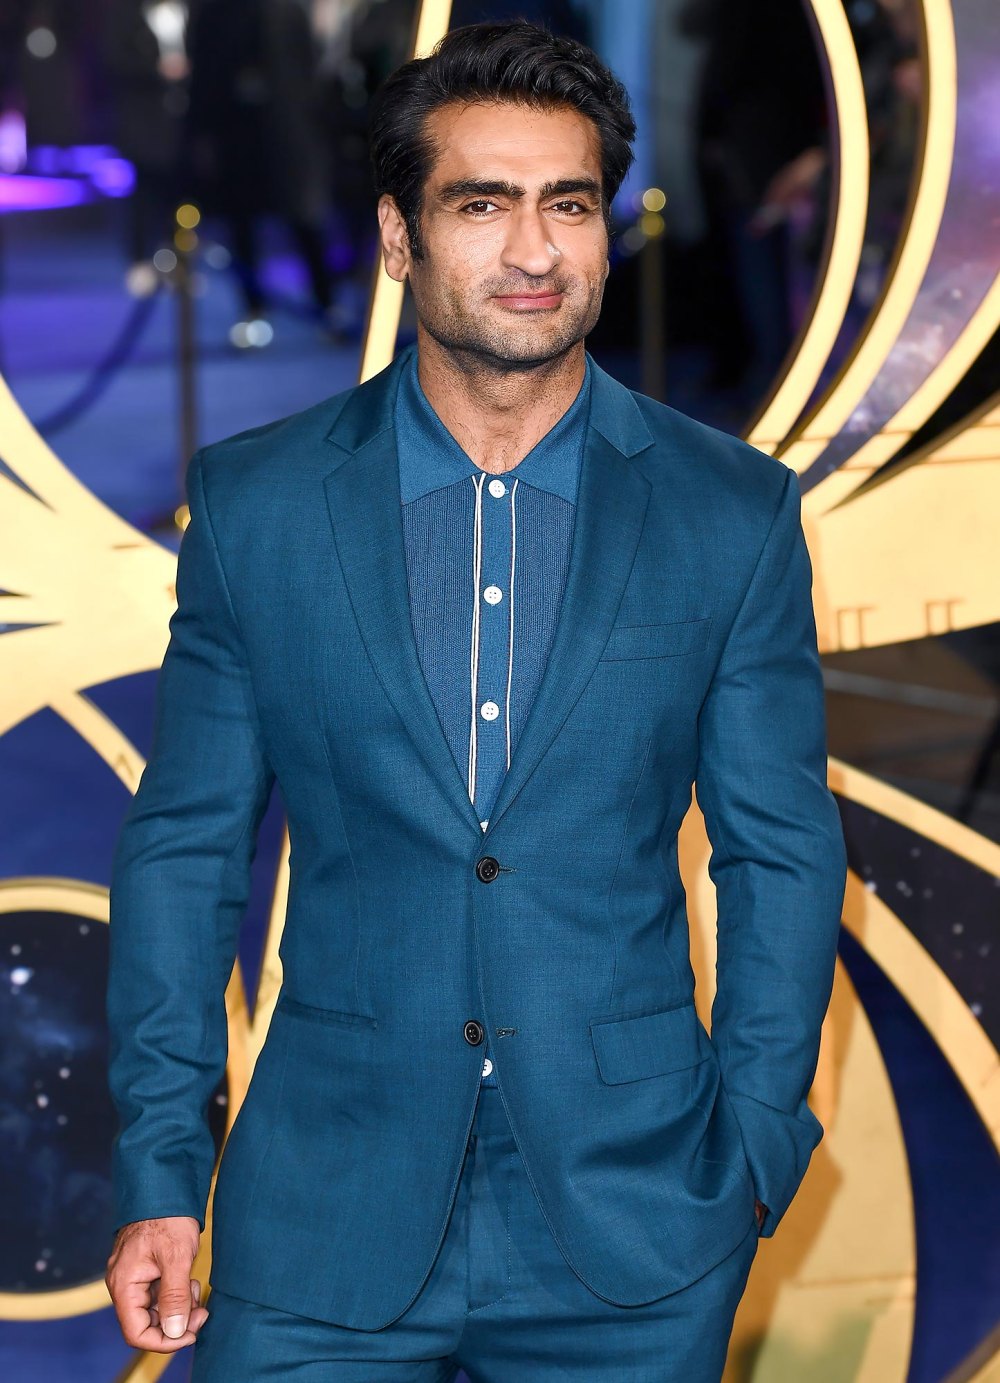 Kumail Nanjiani Went to Counseling After Receiving Negative Reviews for Eternals